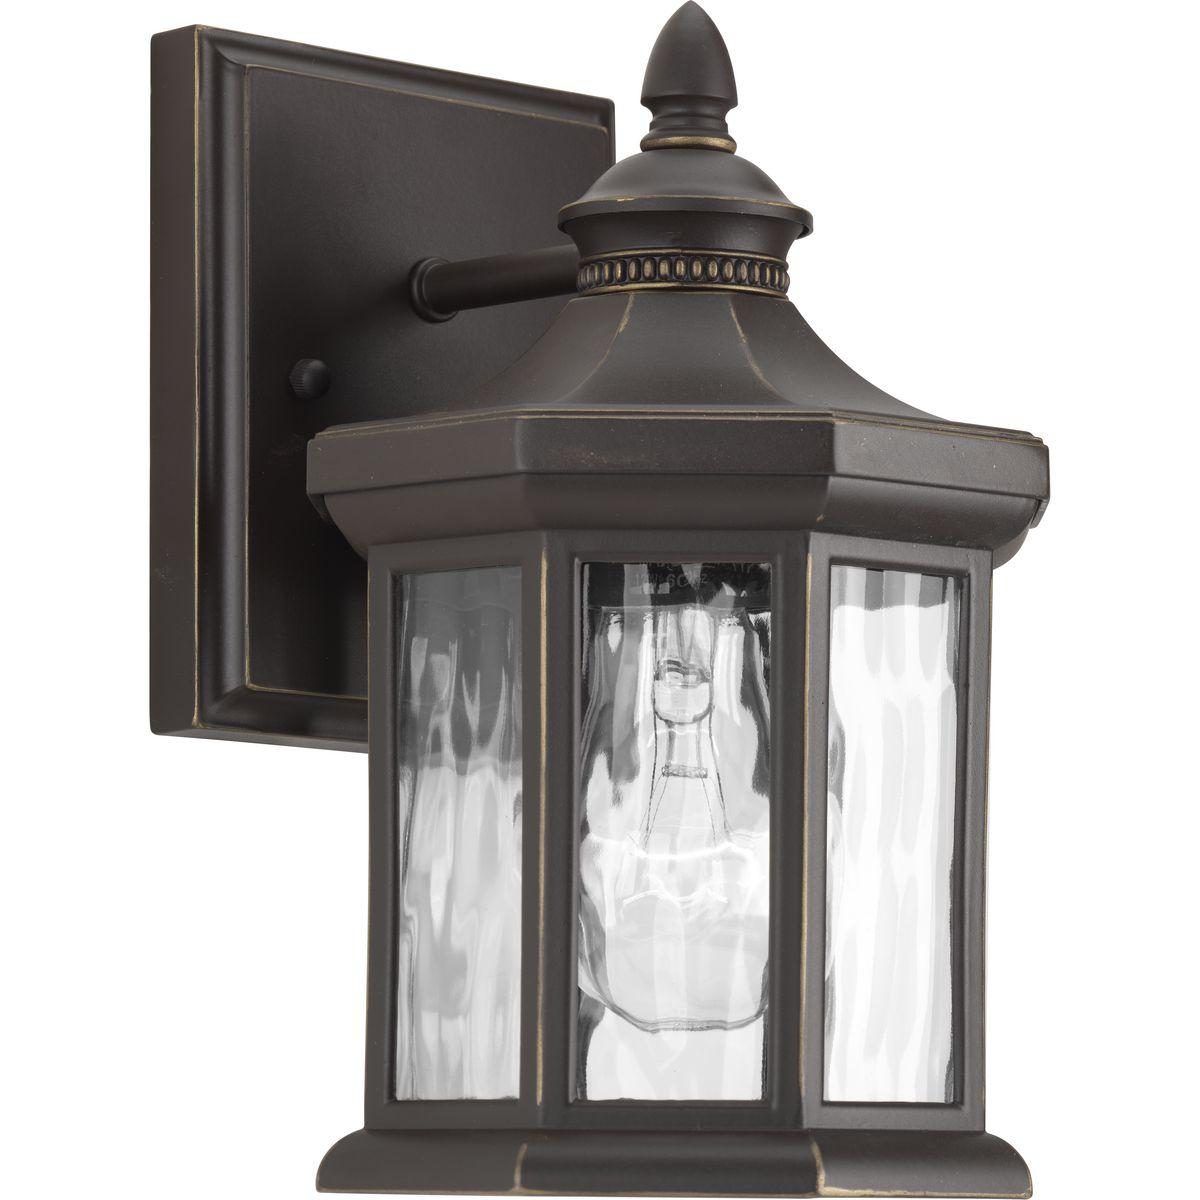 Hubbell P6070-20 The one-light small wall lantern in the Edition collection features distinctive octagonal shape for classic styling. Clear water glass elements are accented by a Antique Bronze finish. Die-cast aluminum construction with a powder coat finish makes this a 